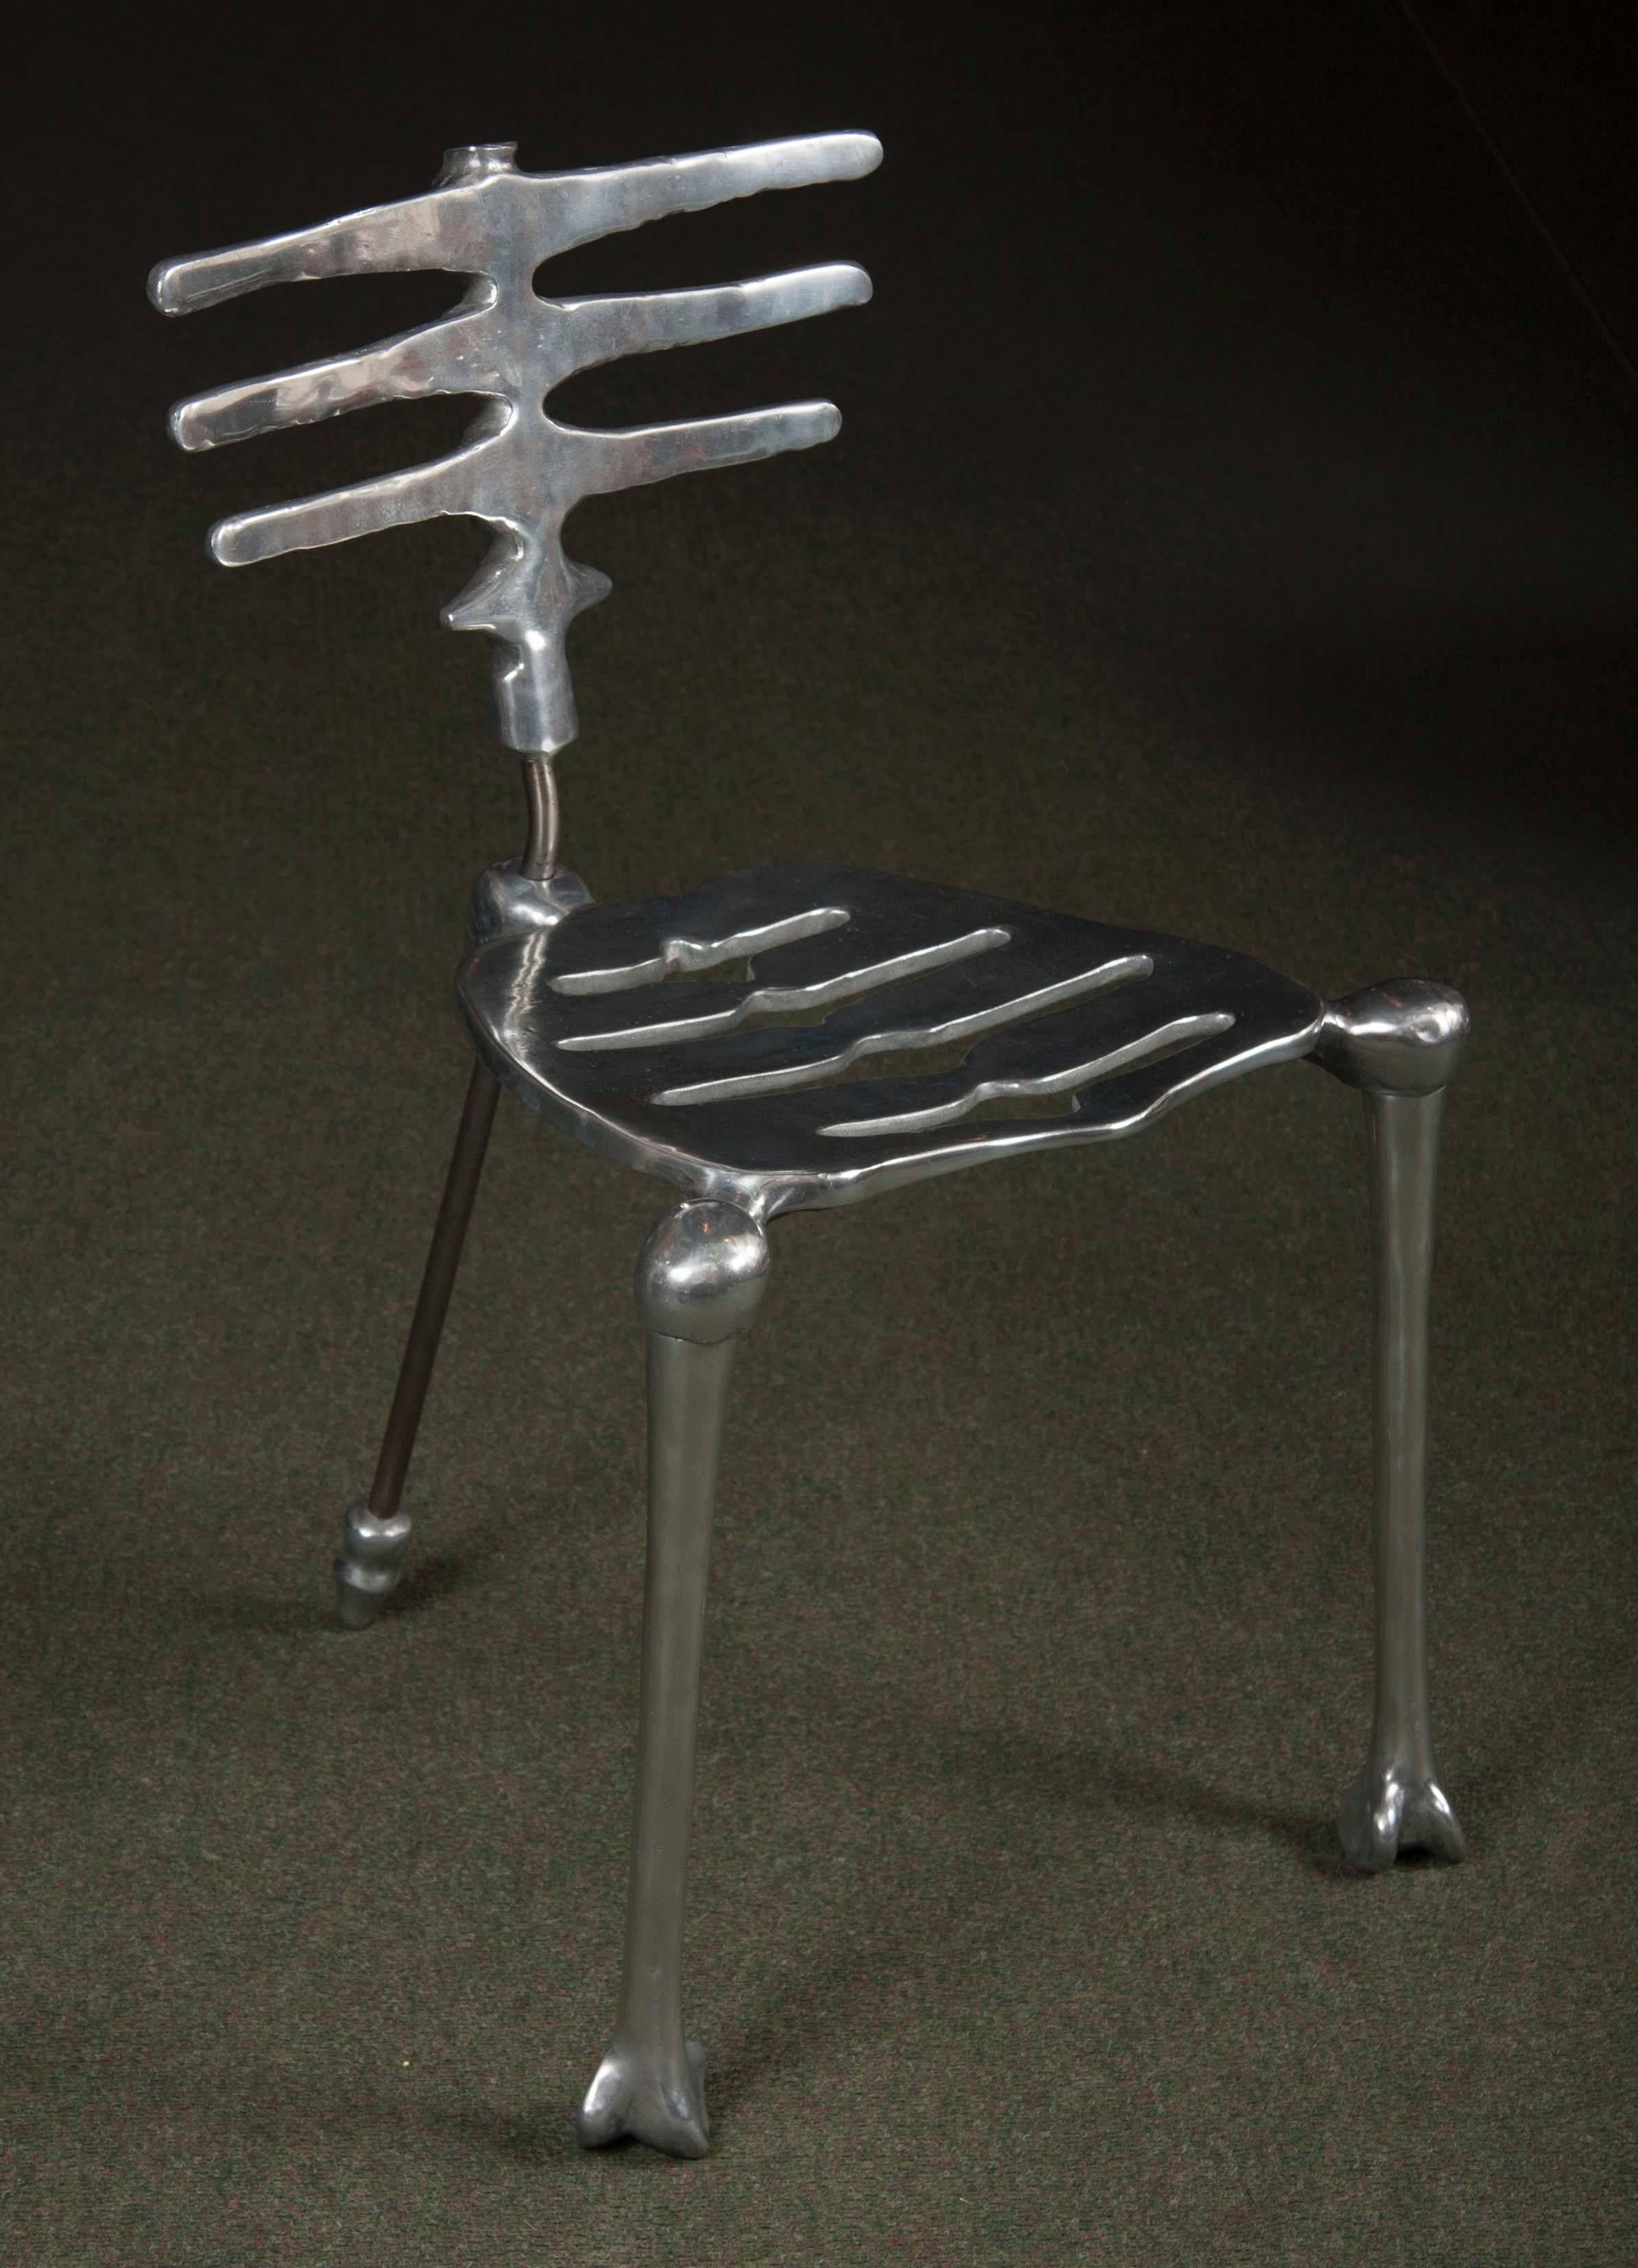 A polished aluminum skeleton form side chair by Michael Aram.